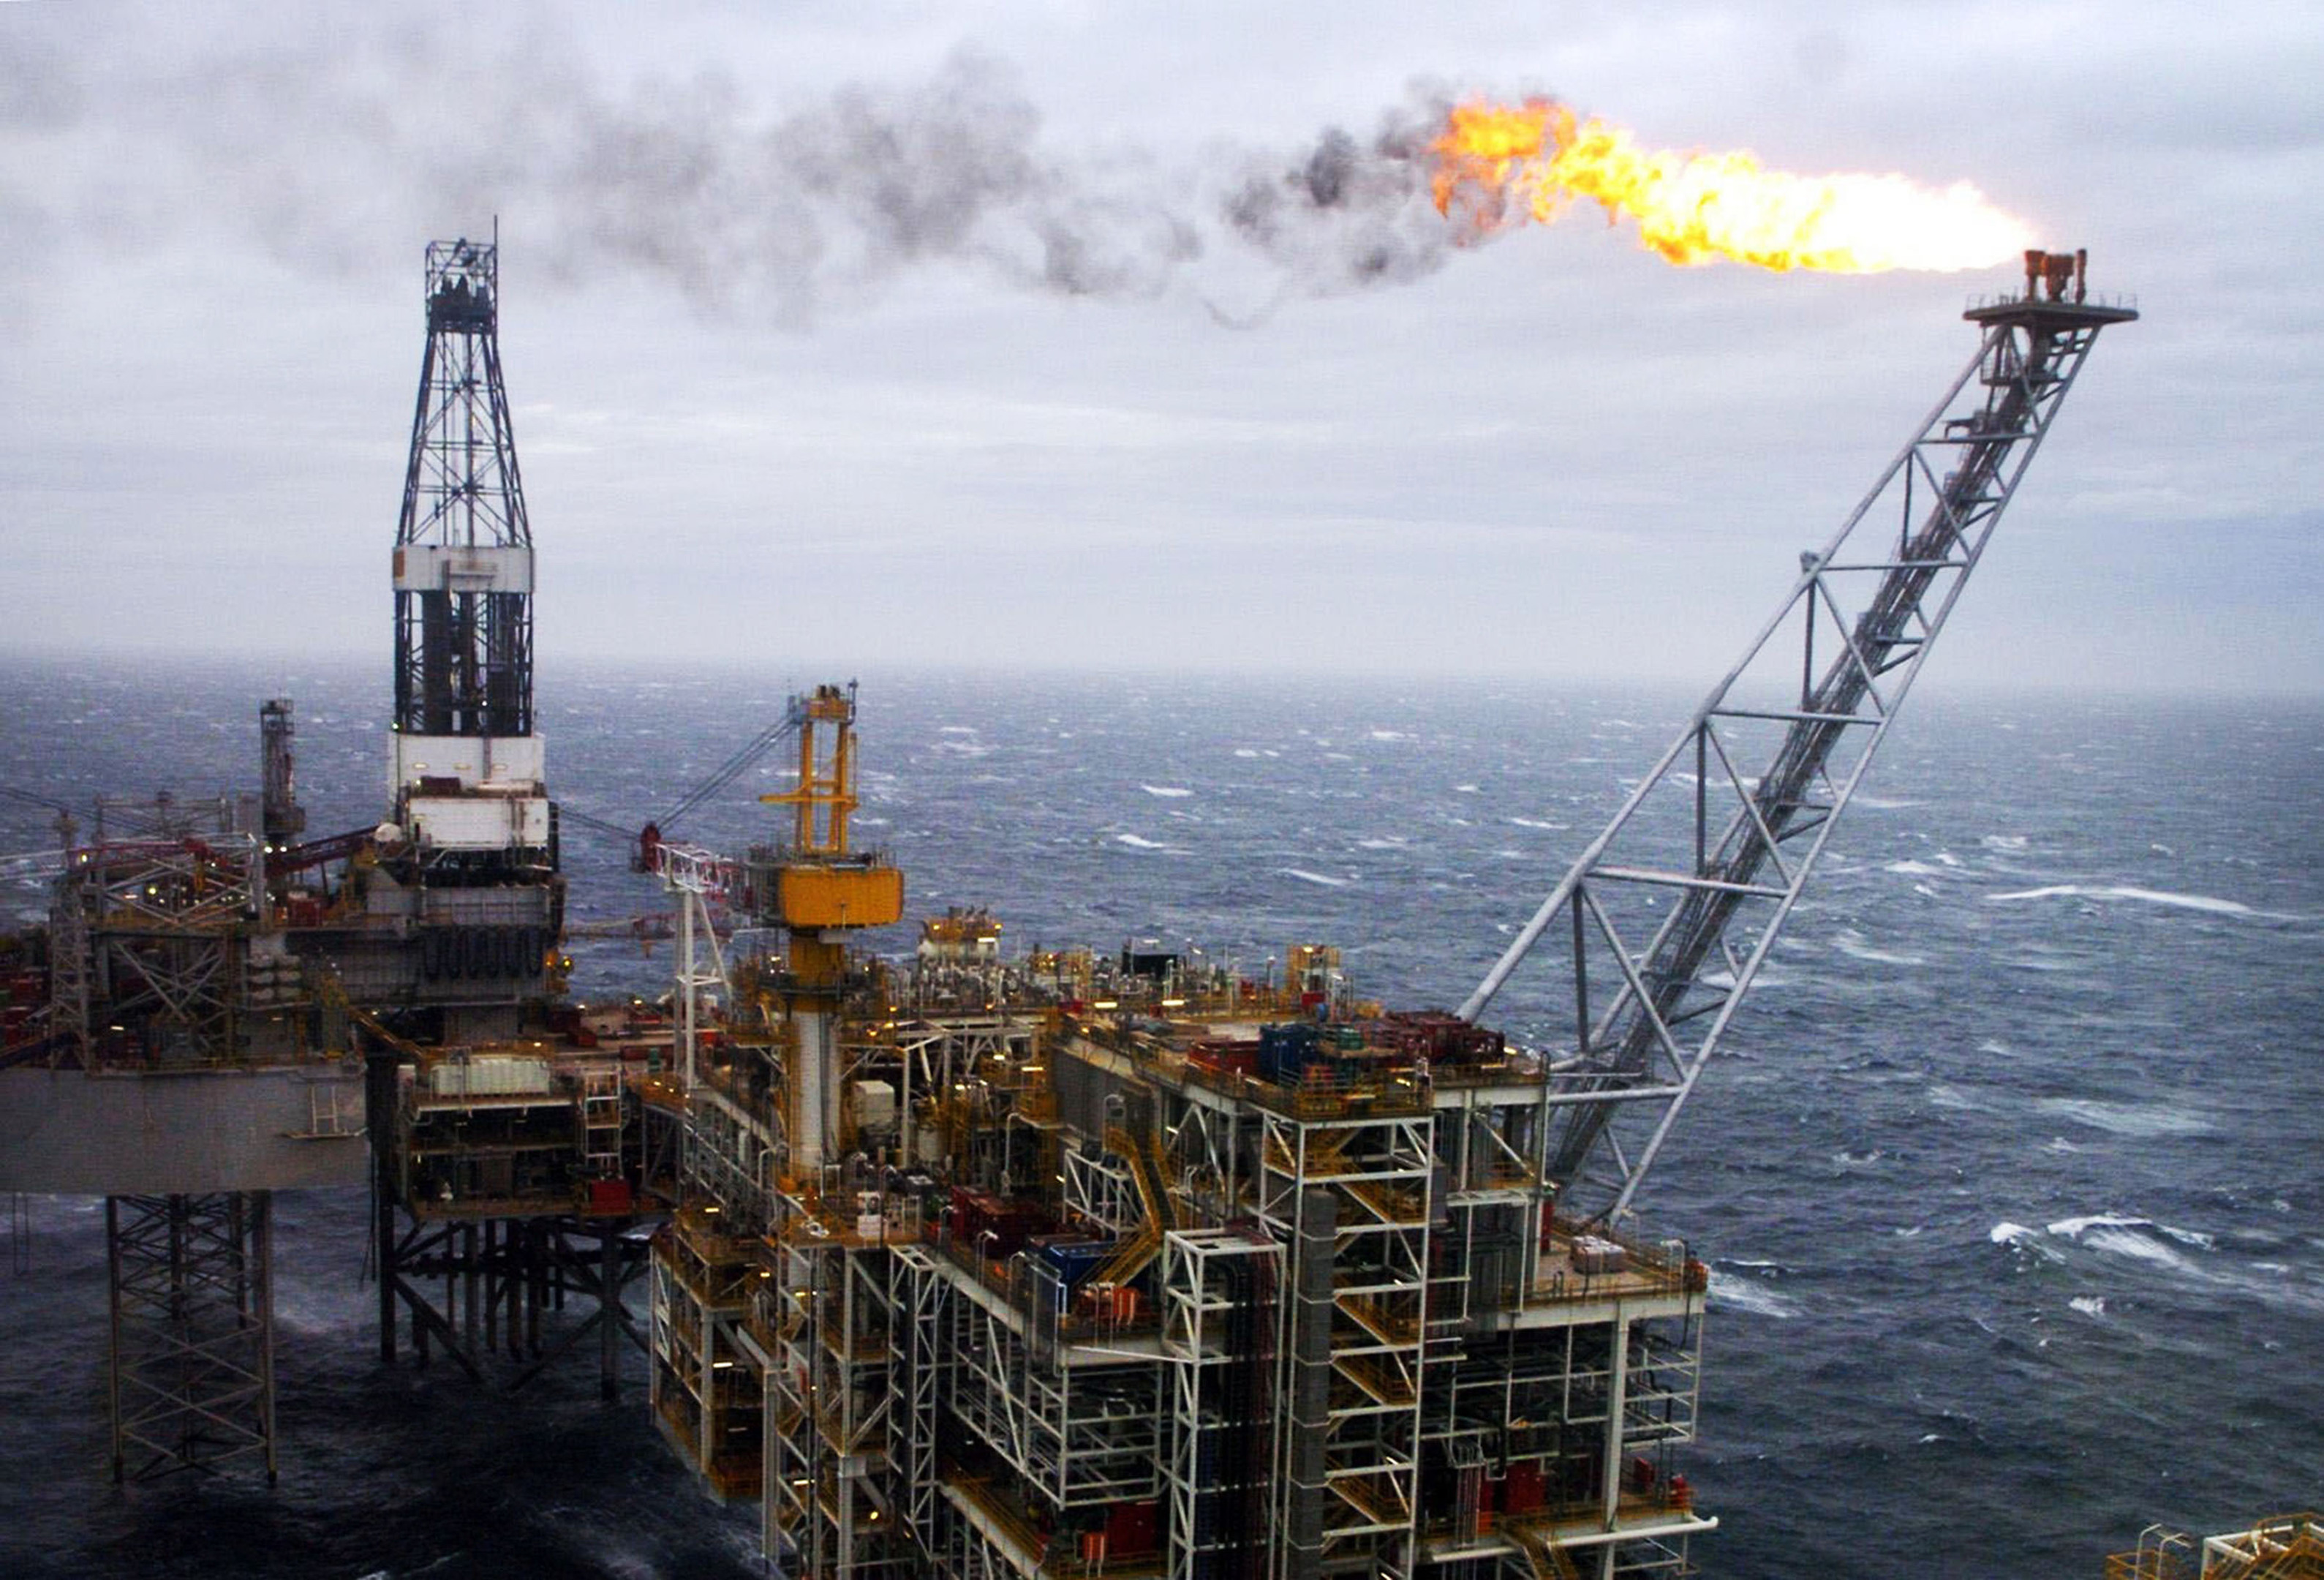 The downturn in North Sea Oil is having an effect across north east Scotland.